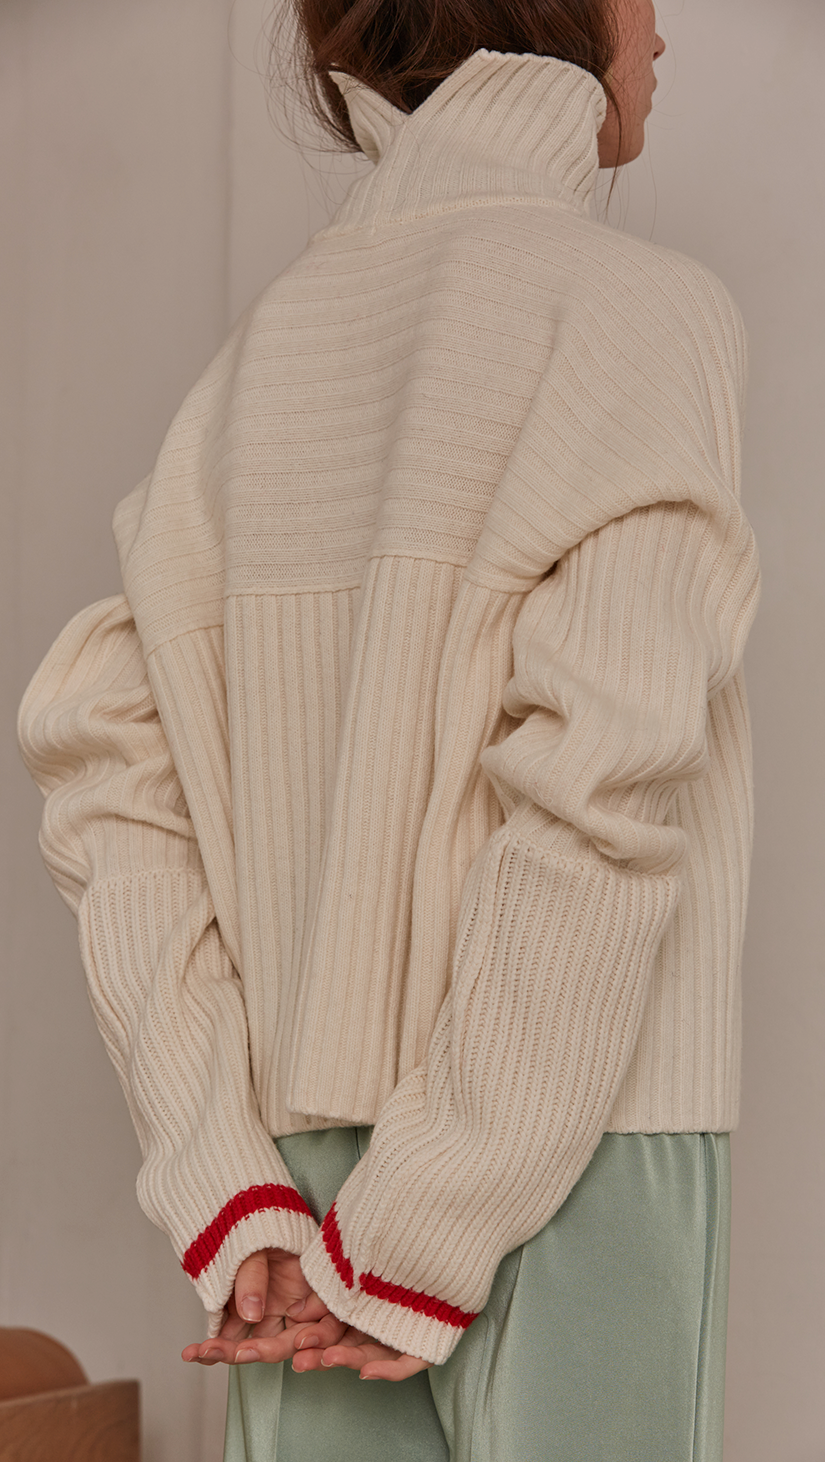   Jupe Sweater in Ivory. Cowl neck ribbed sweater with pointed dropped shoulder seams and extra long raglan sleeves. Designed to be loose fit.